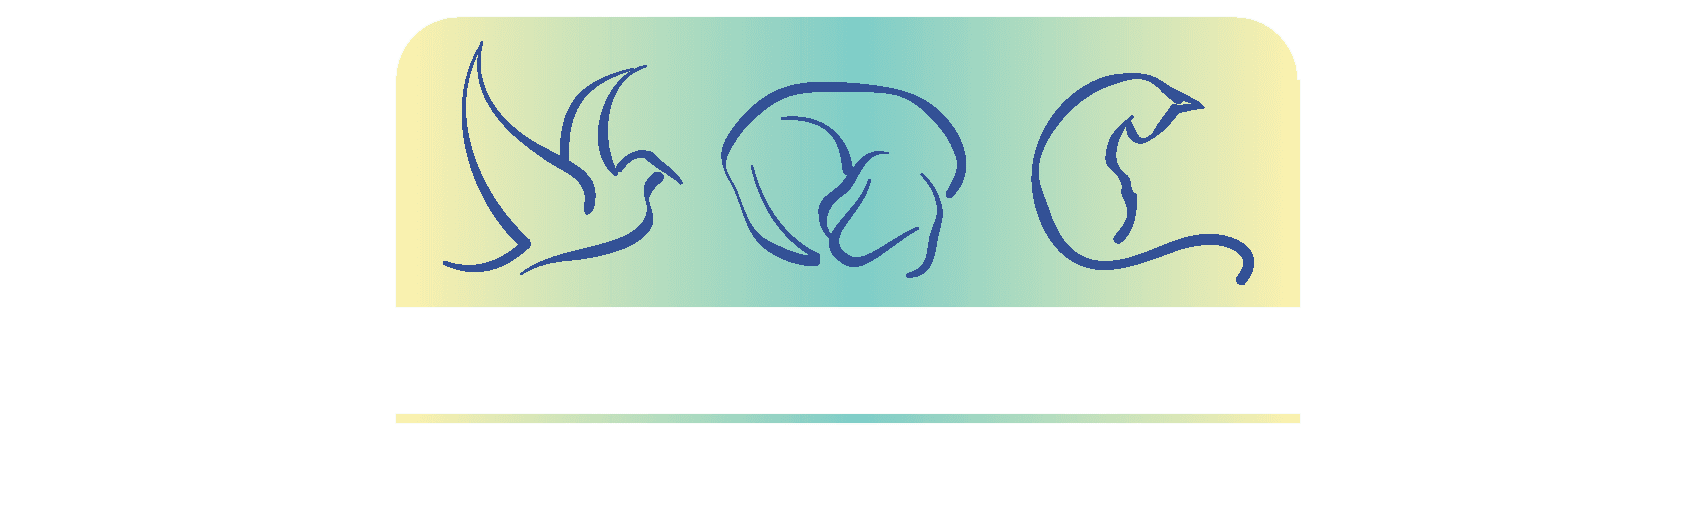 Veterinary Oncology Consultants